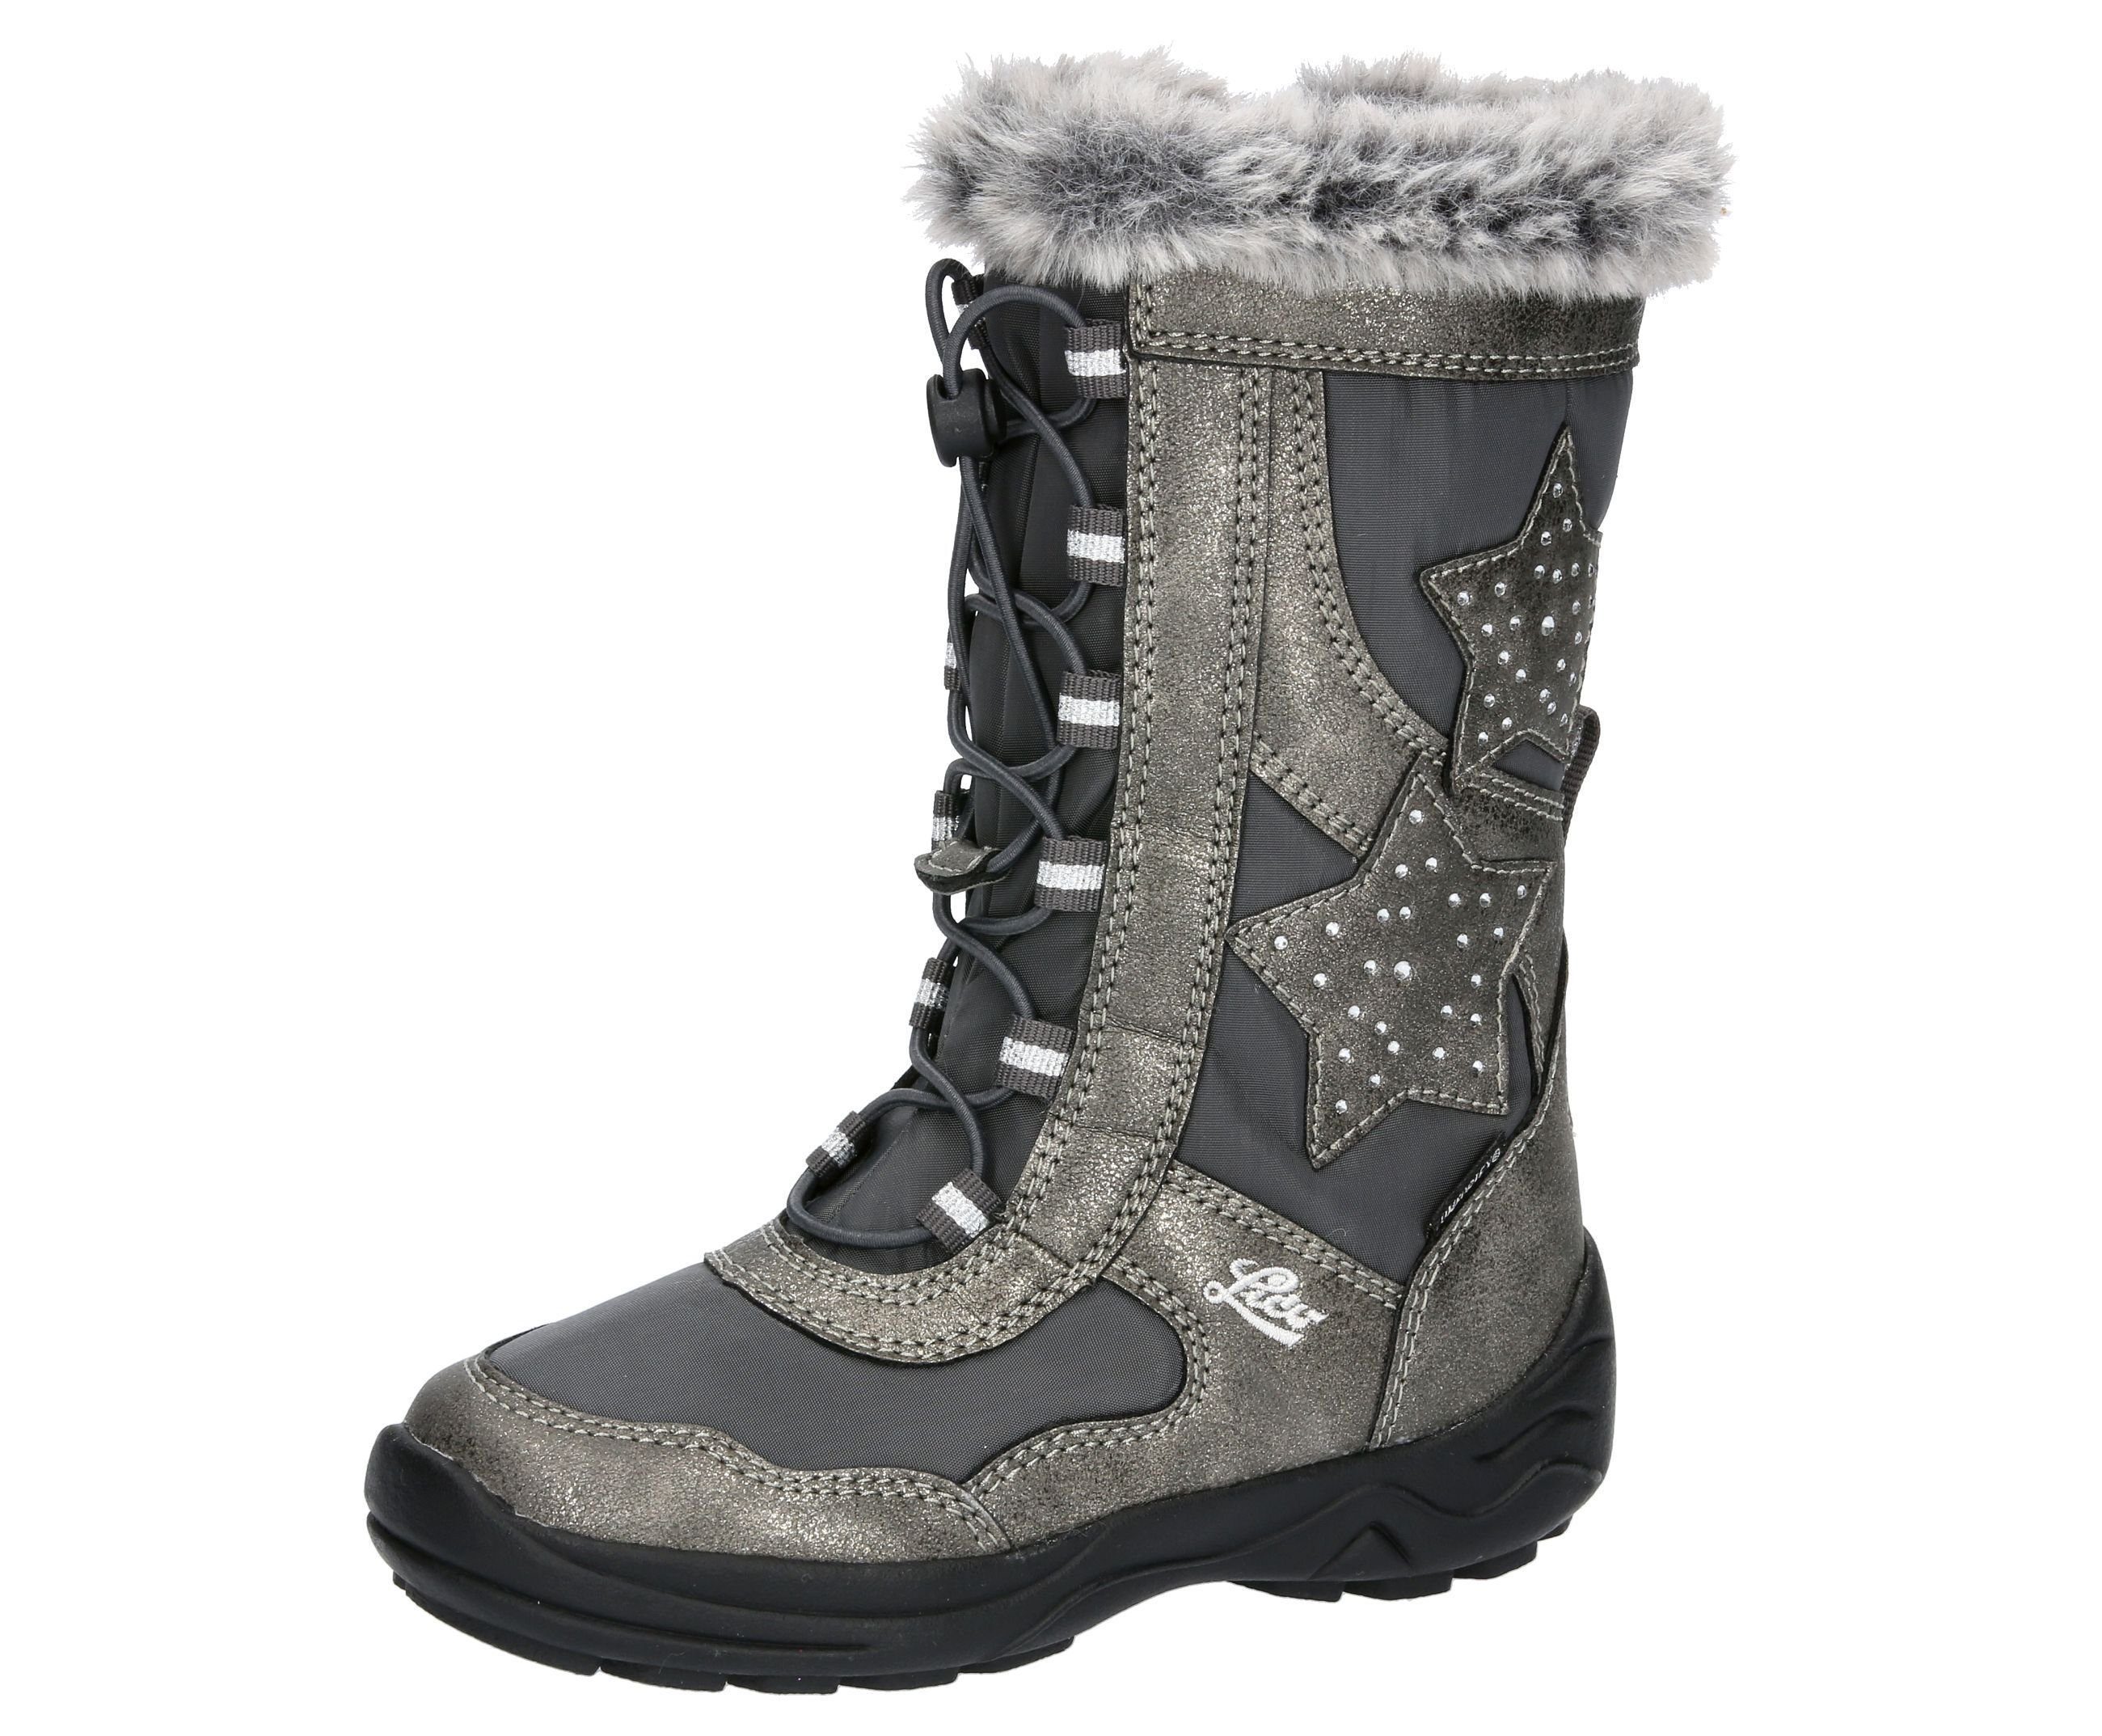 Winterboot Cathrin Lico Winterboots